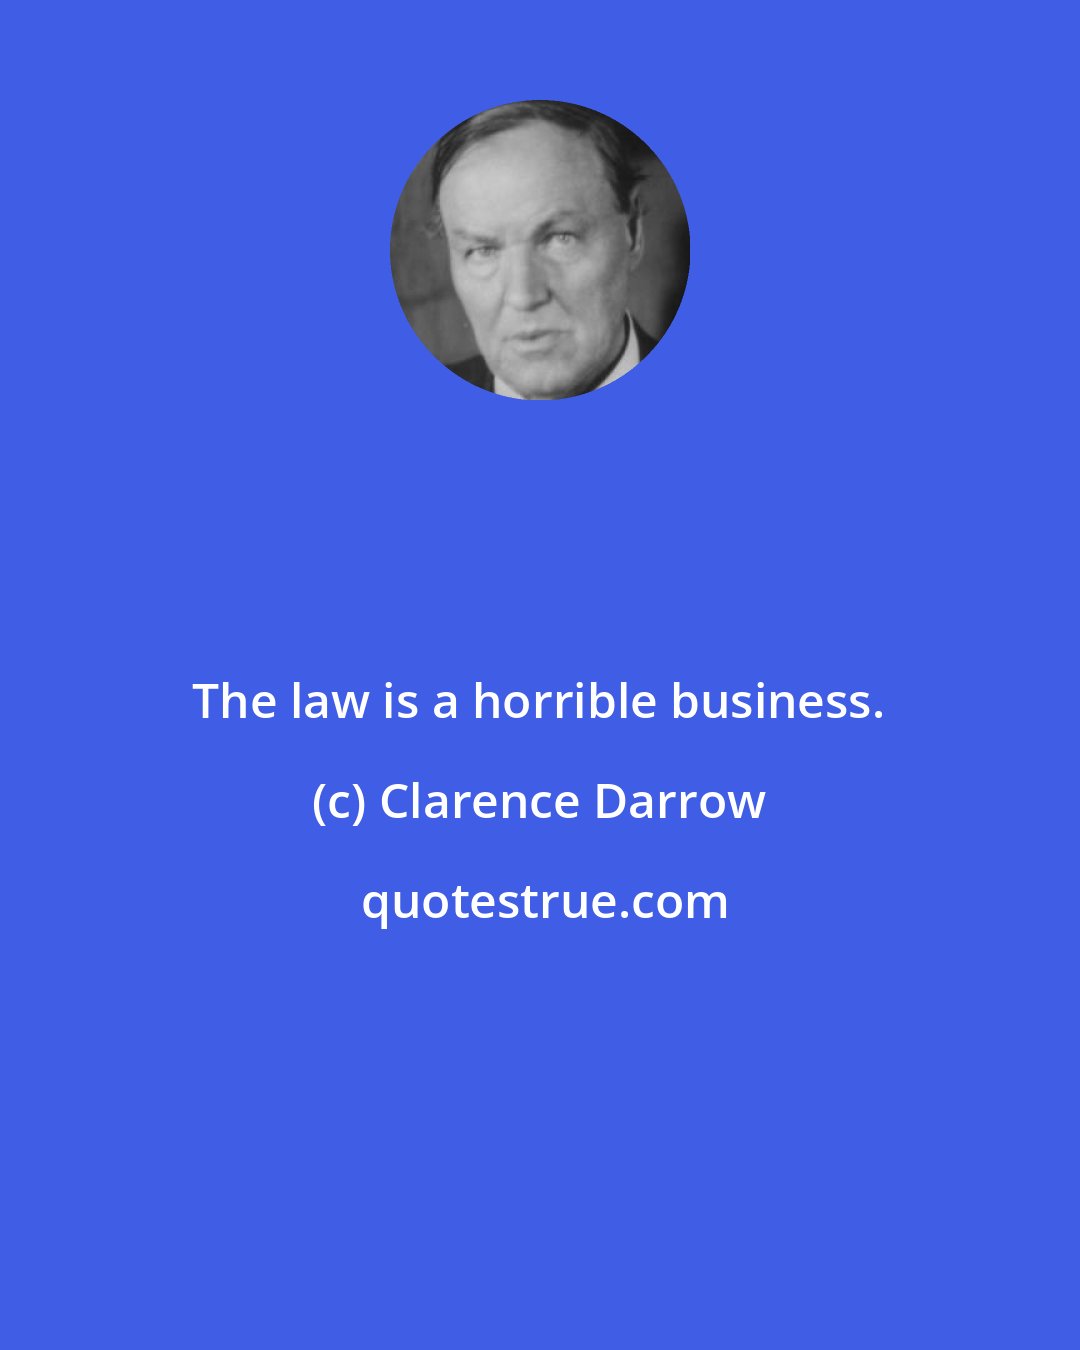 Clarence Darrow: The law is a horrible business.